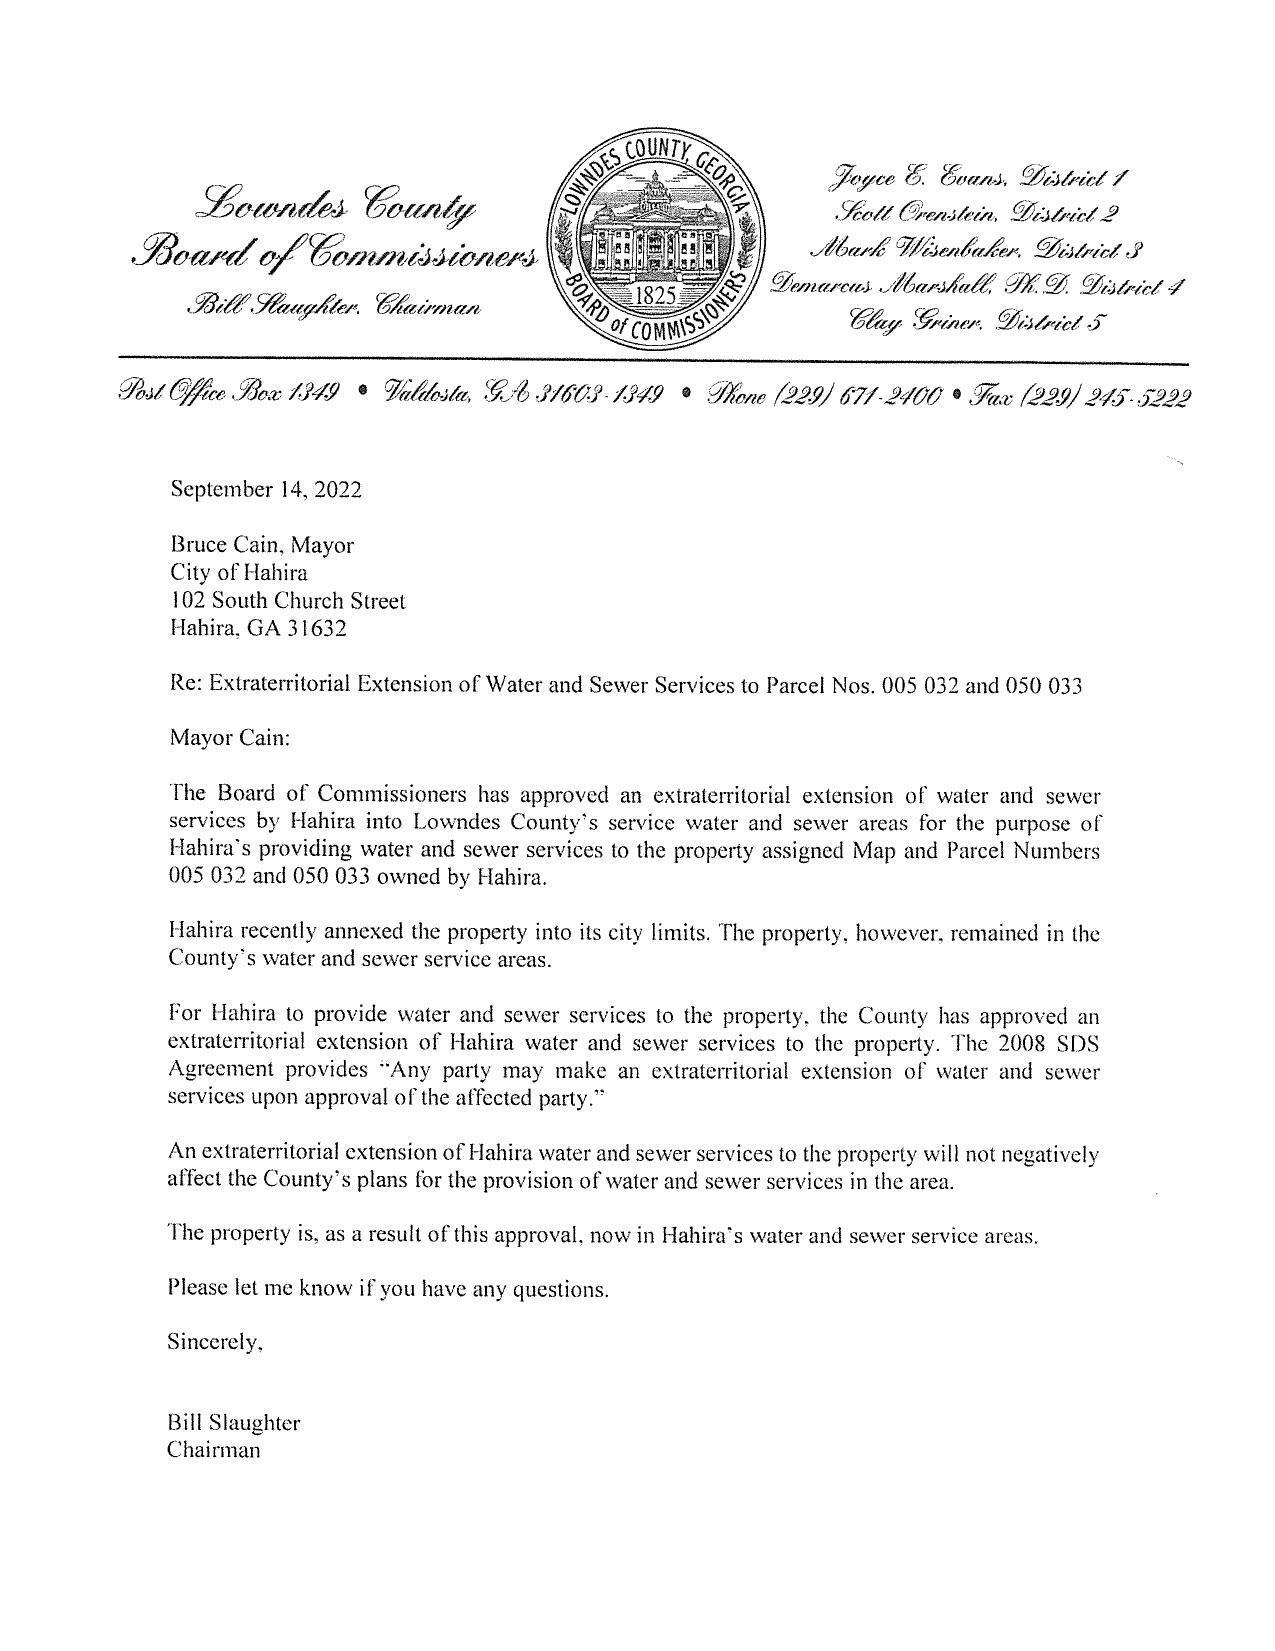 Approval letter from Lowndes County to Hahira